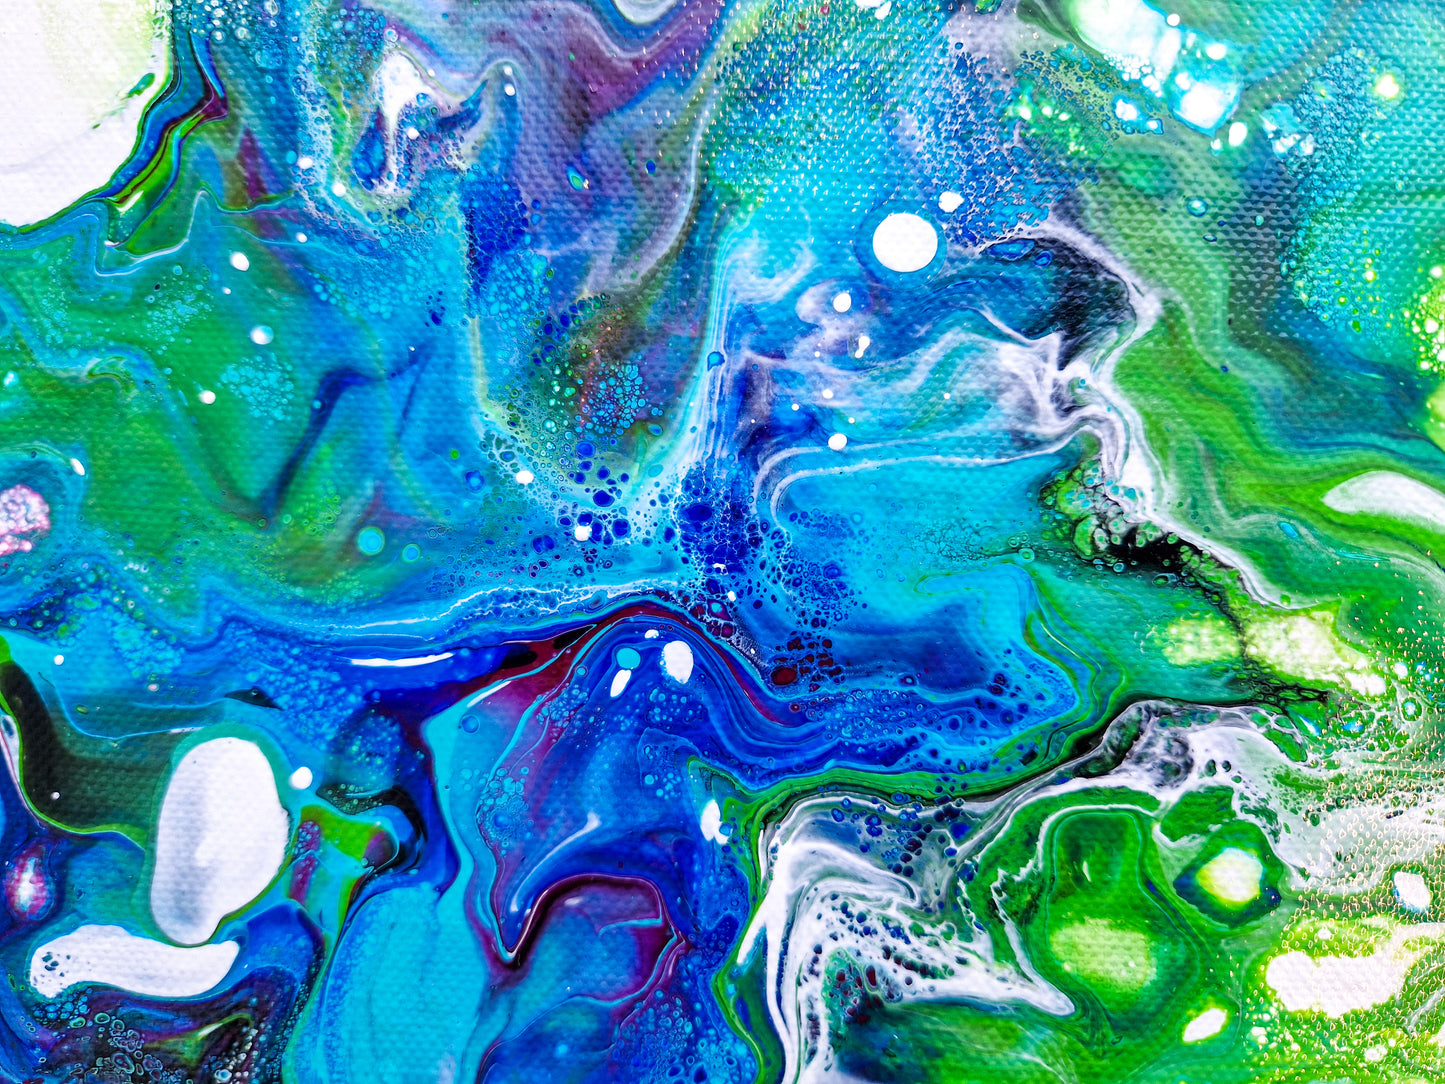 Acrylic Painting Abstract Green Blue Dutch Pouring ARTYMargarita.com